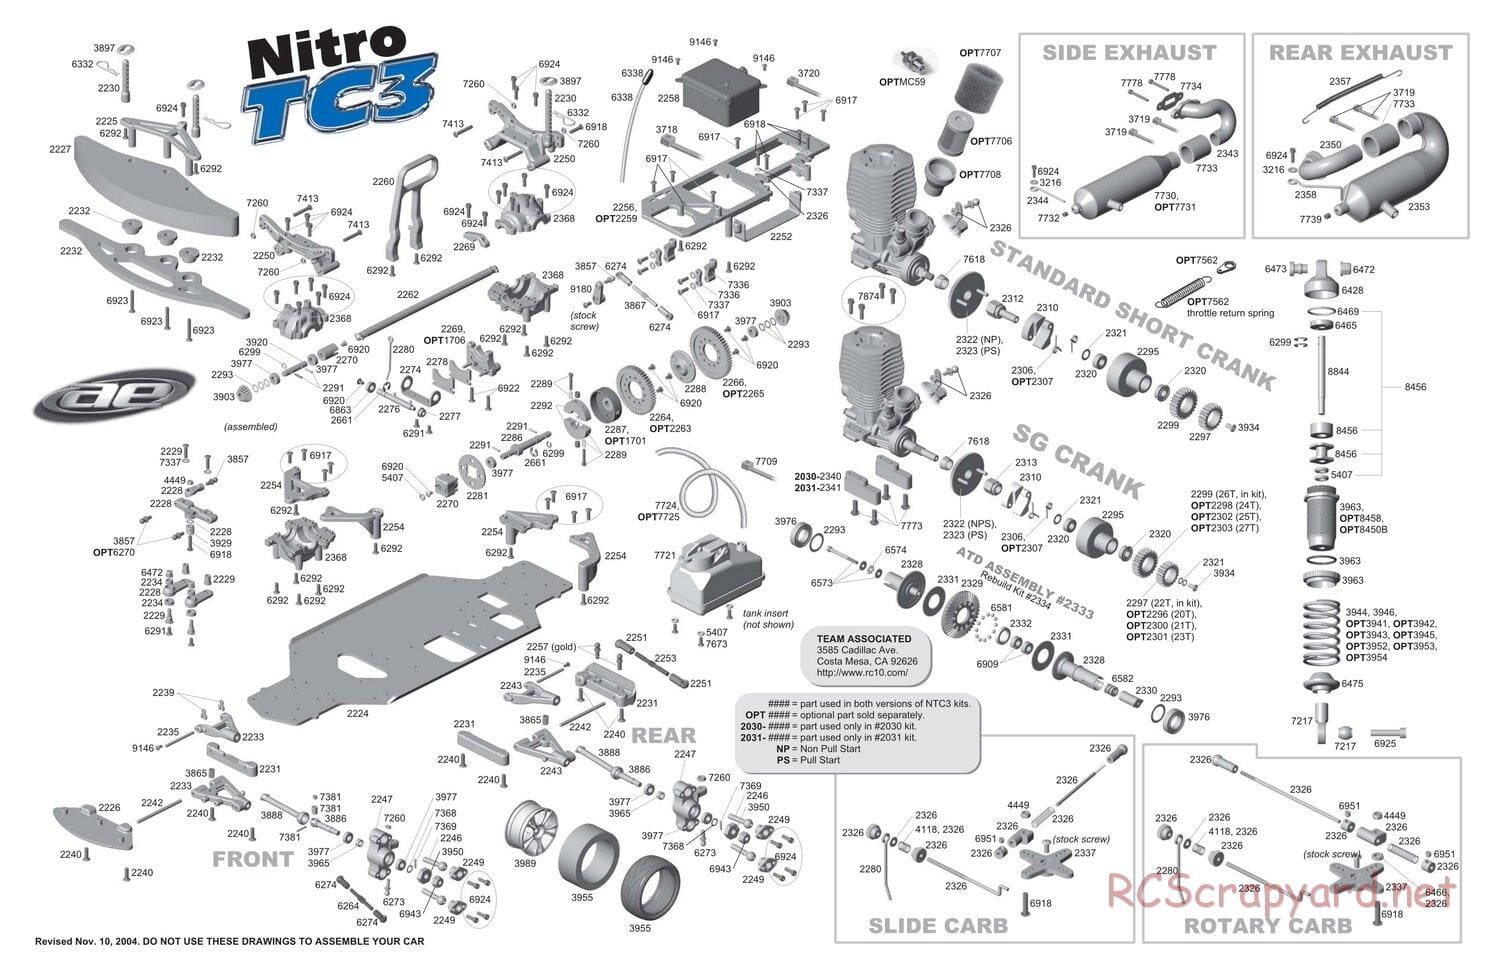 Team Associated - NTC3 - Exploded View